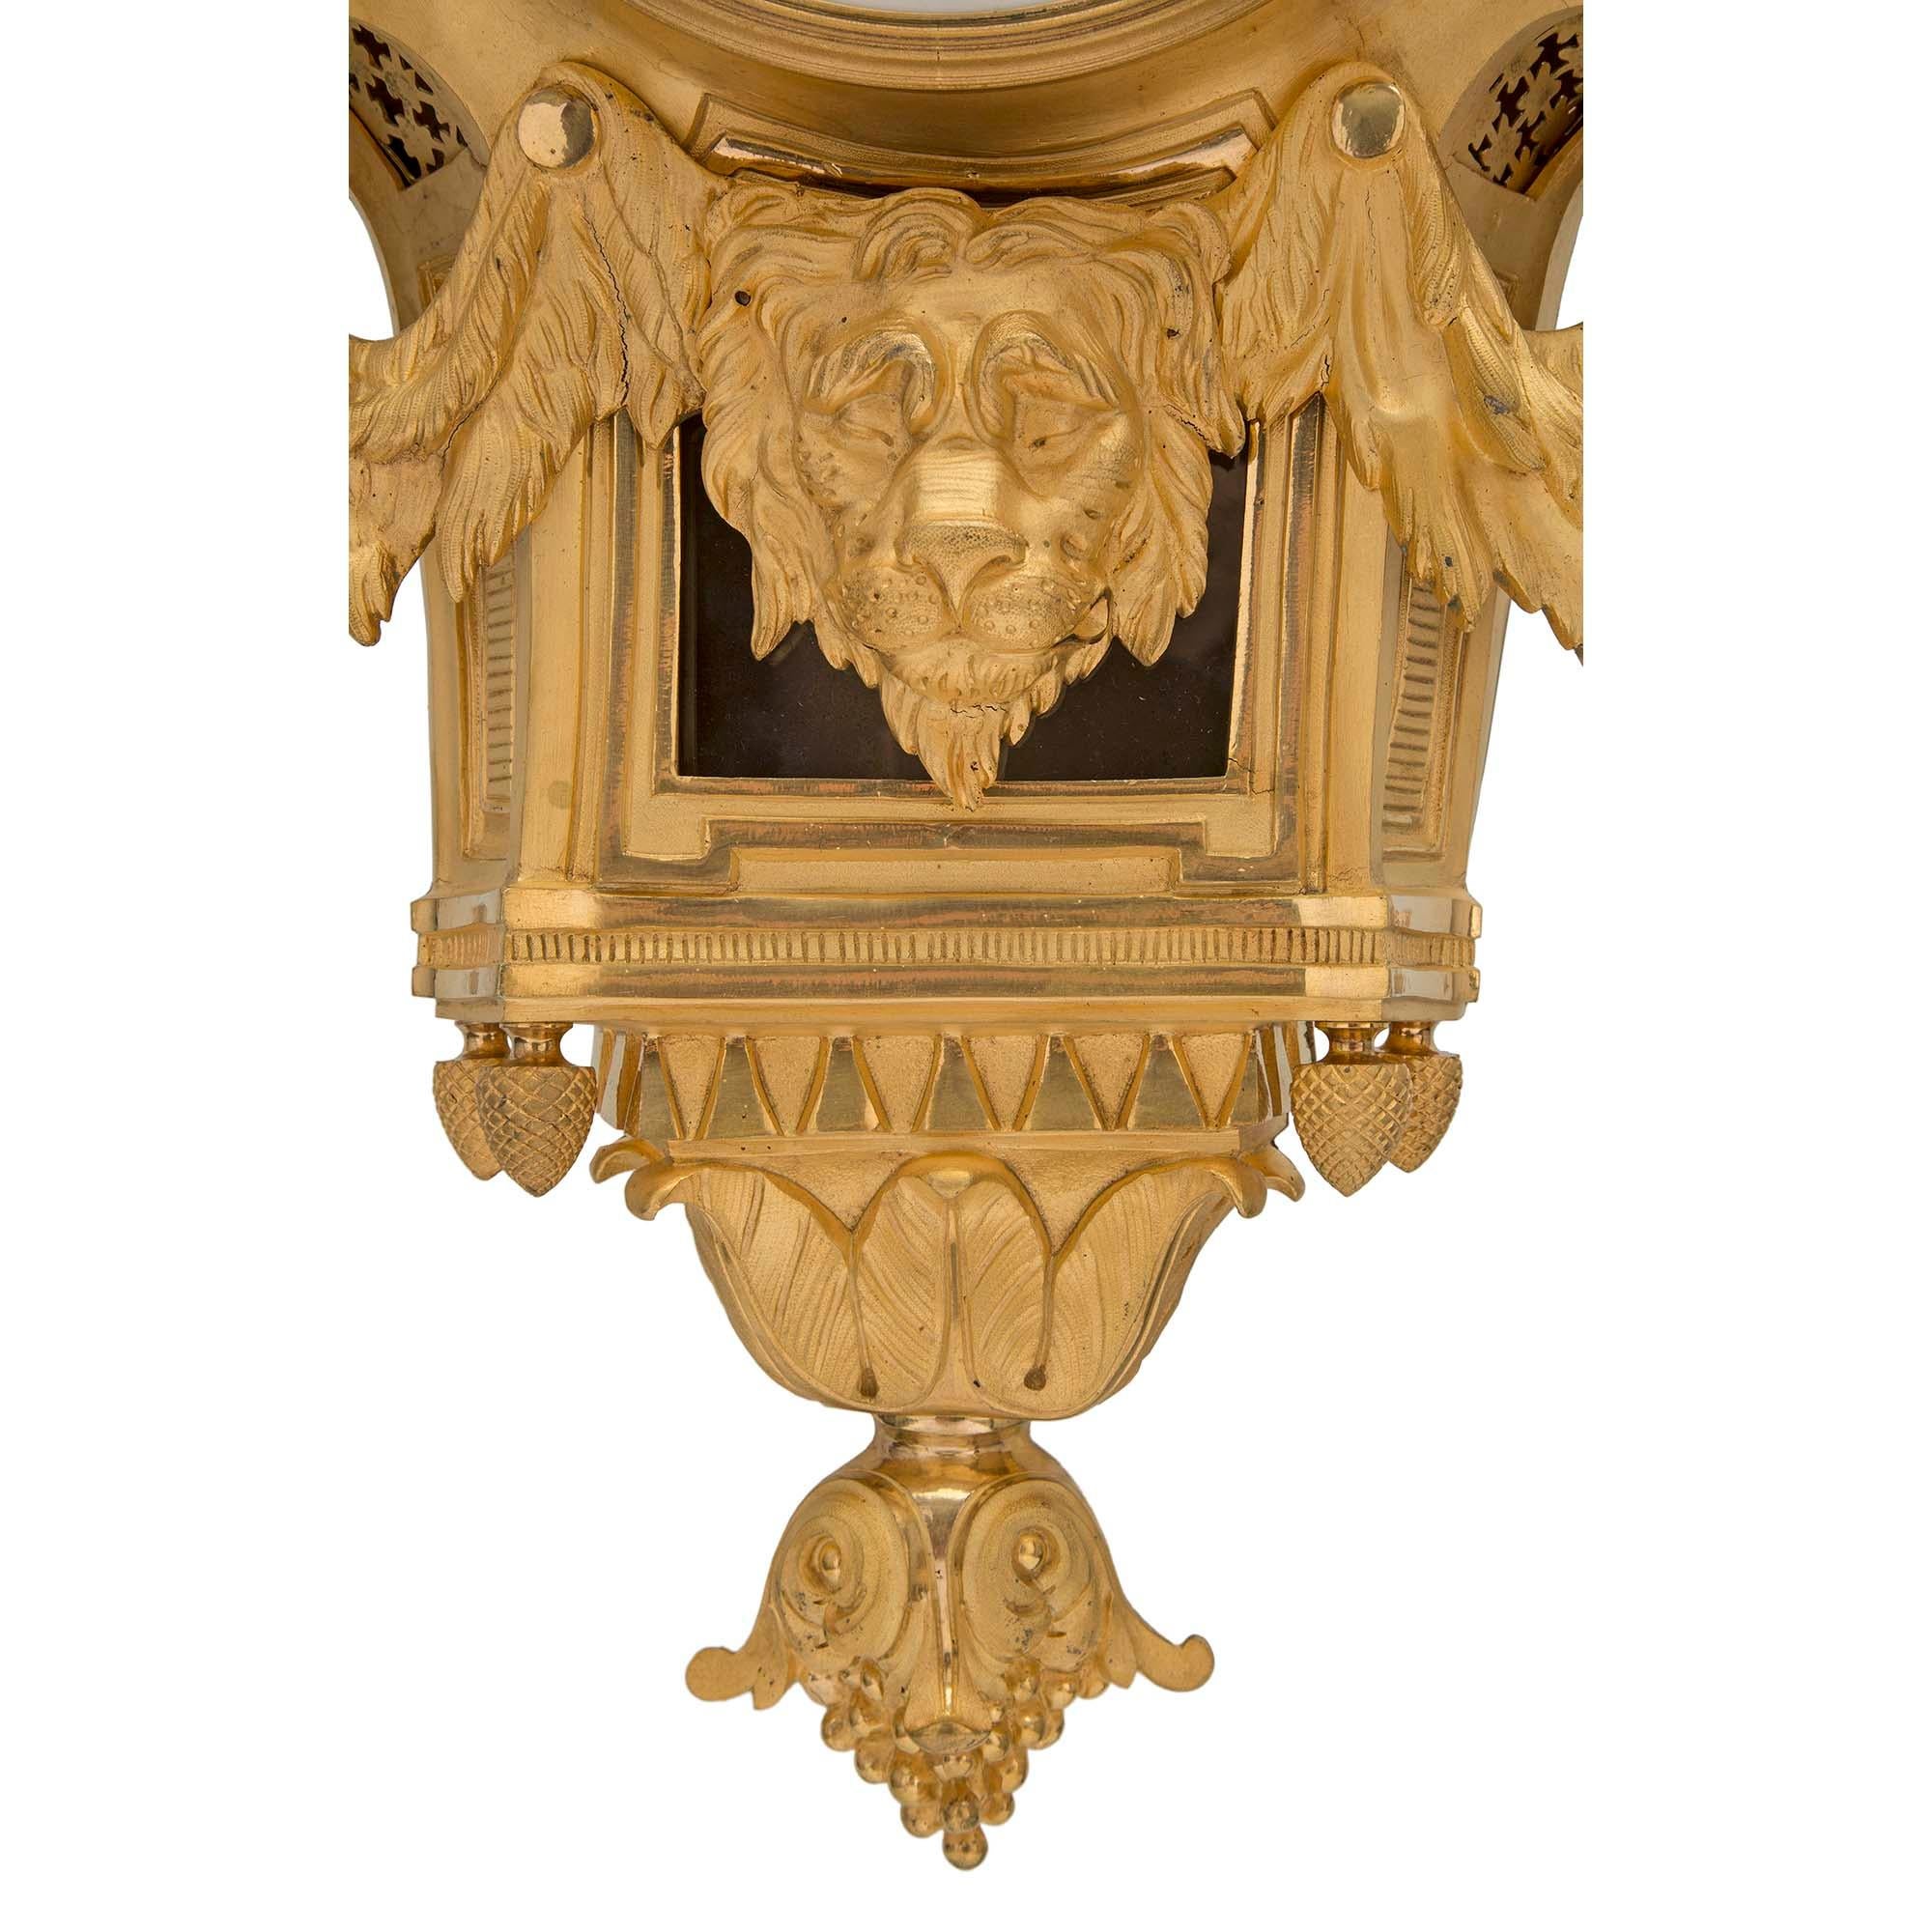 French 19th Century Louis XVI Style Ormolu Cartel Clock, by L. Marchand For Sale 3